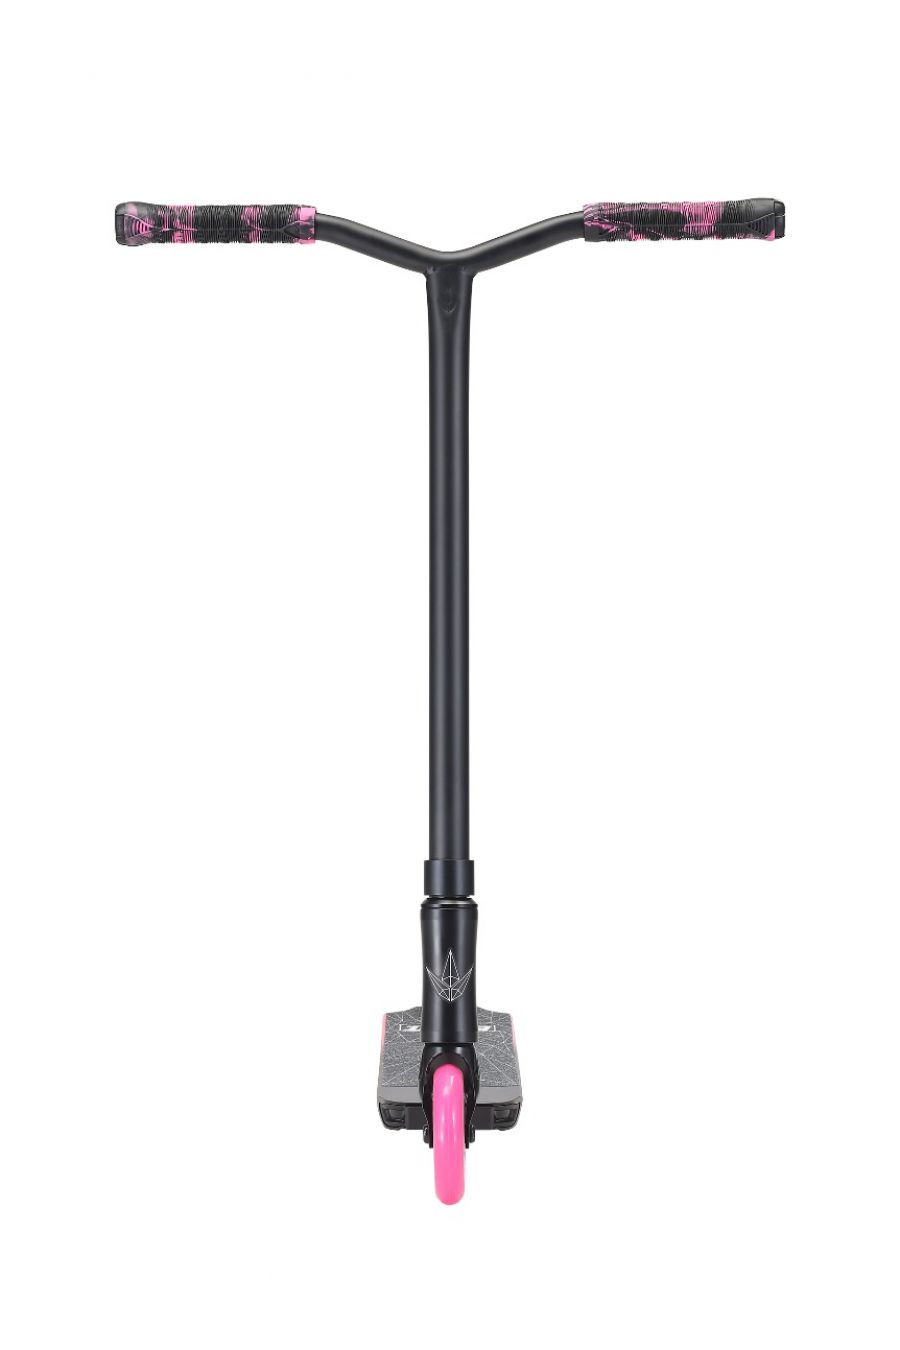 Envy One S3 Complete Scooter (Black / Pink)